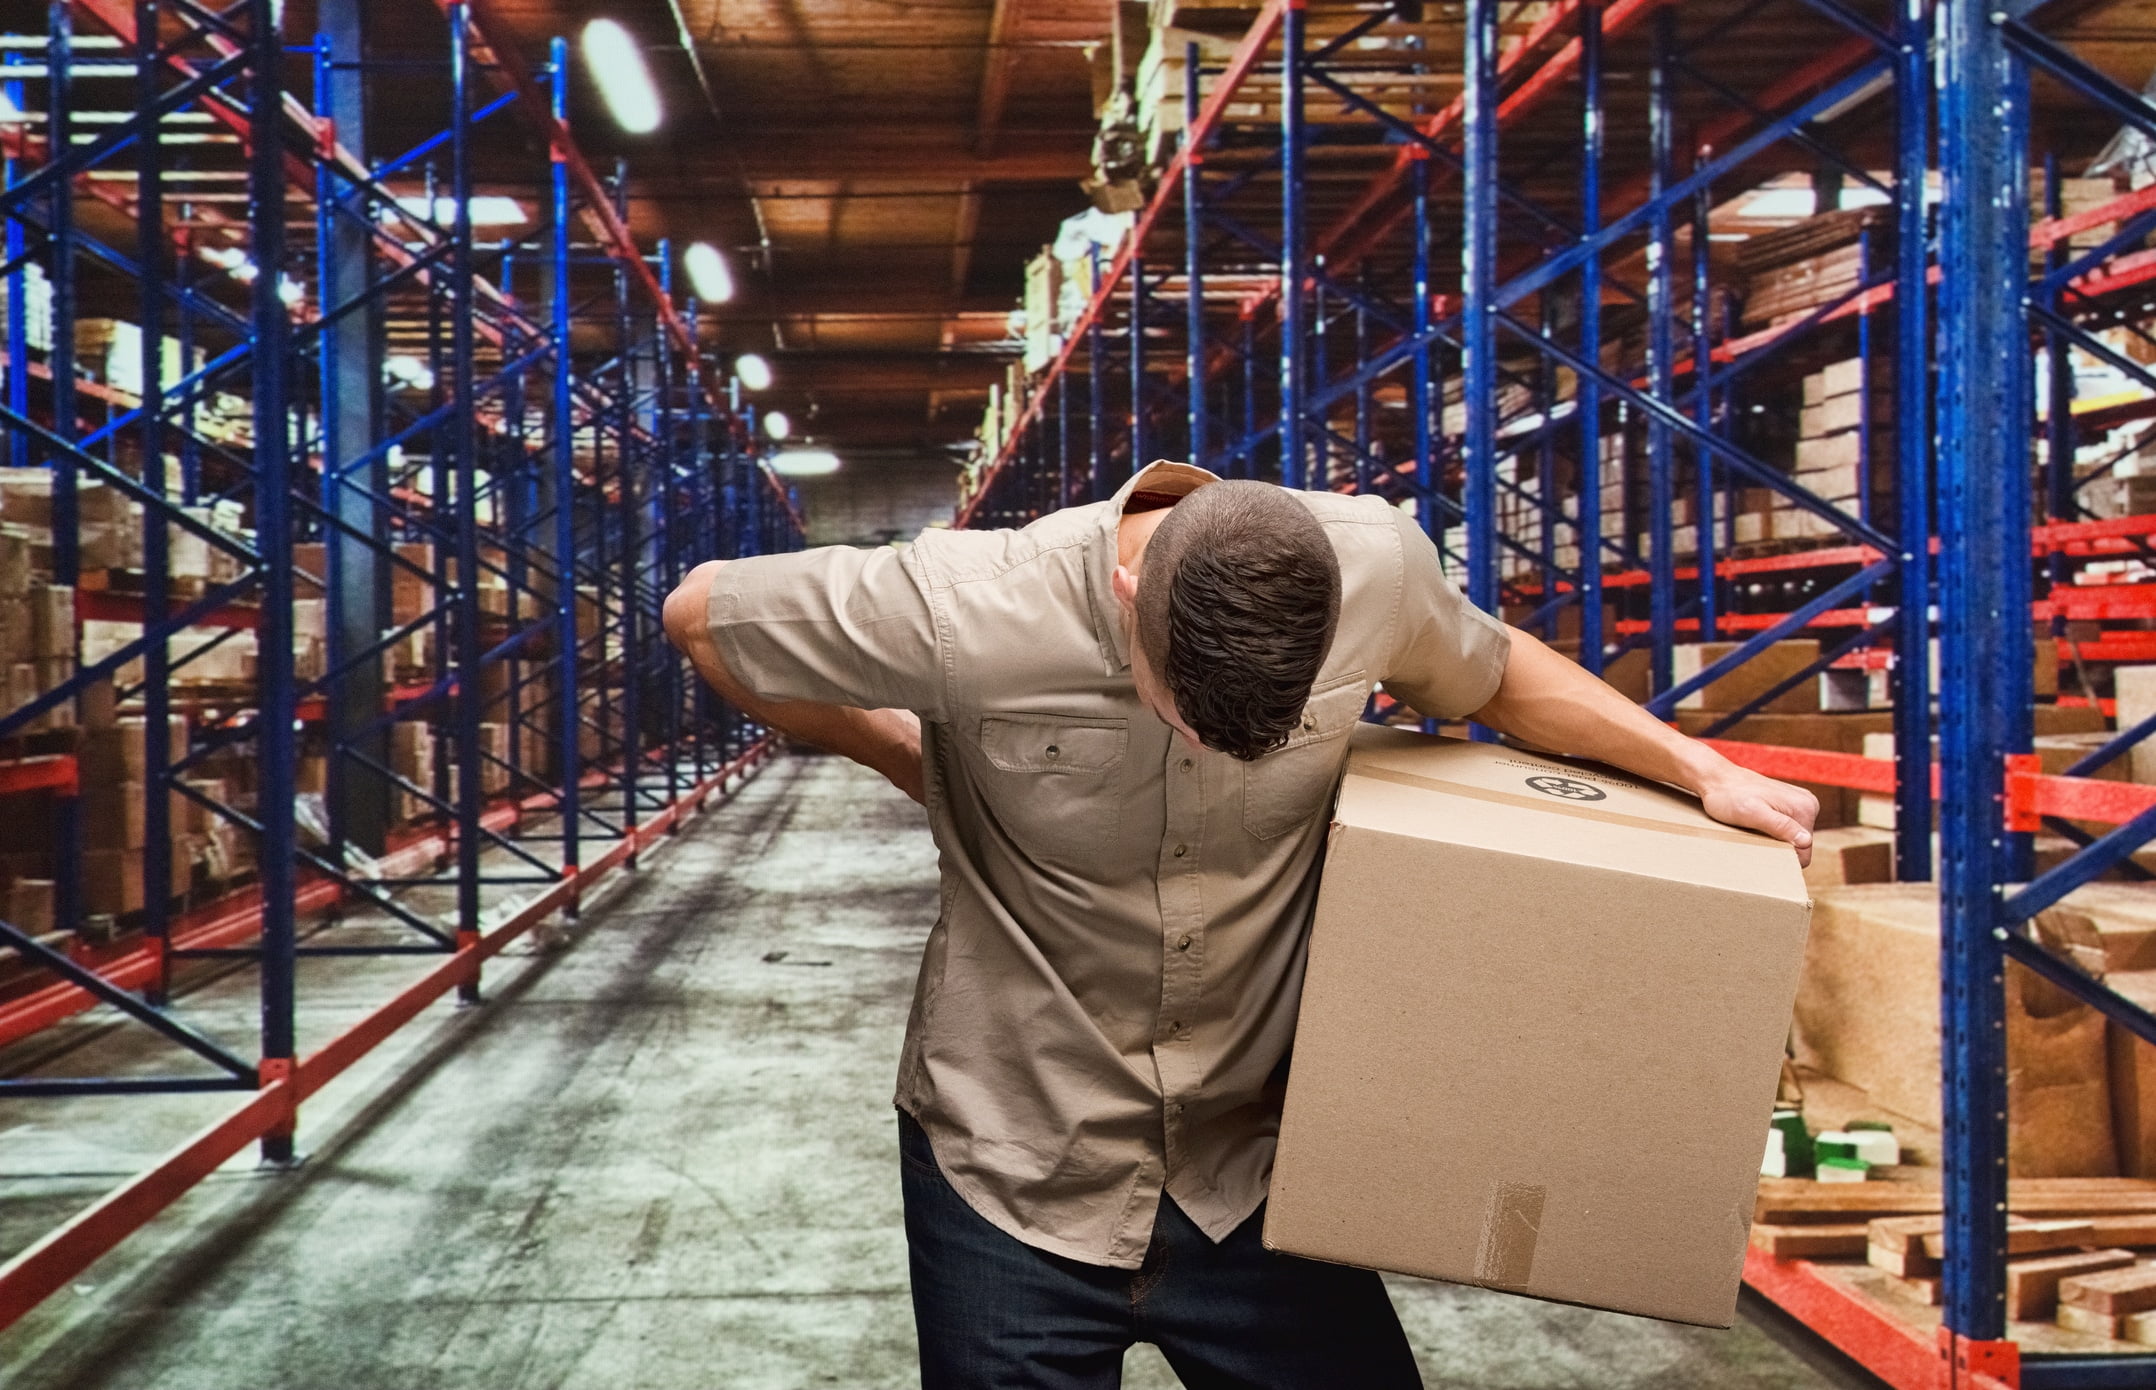 A man working in a warehouse holding his back in pain while carrying boxes.